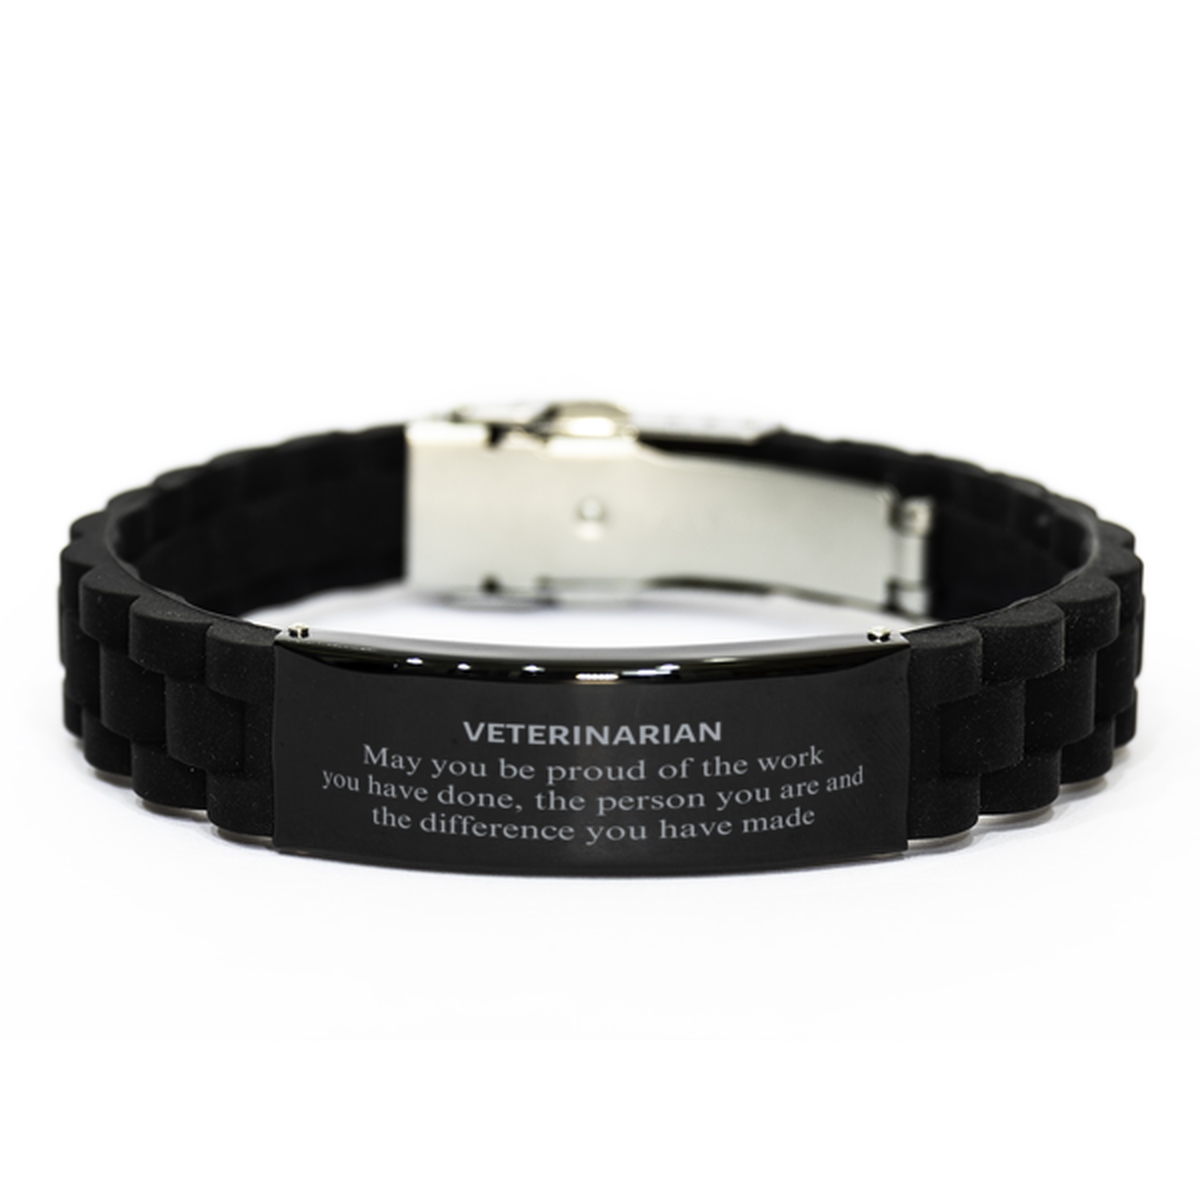 Veterinarian May you be proud of the work you have done, Retirement Veterinarian Black Glidelock Clasp Bracelet for Colleague Appreciation Gifts Amazing for Veterinarian